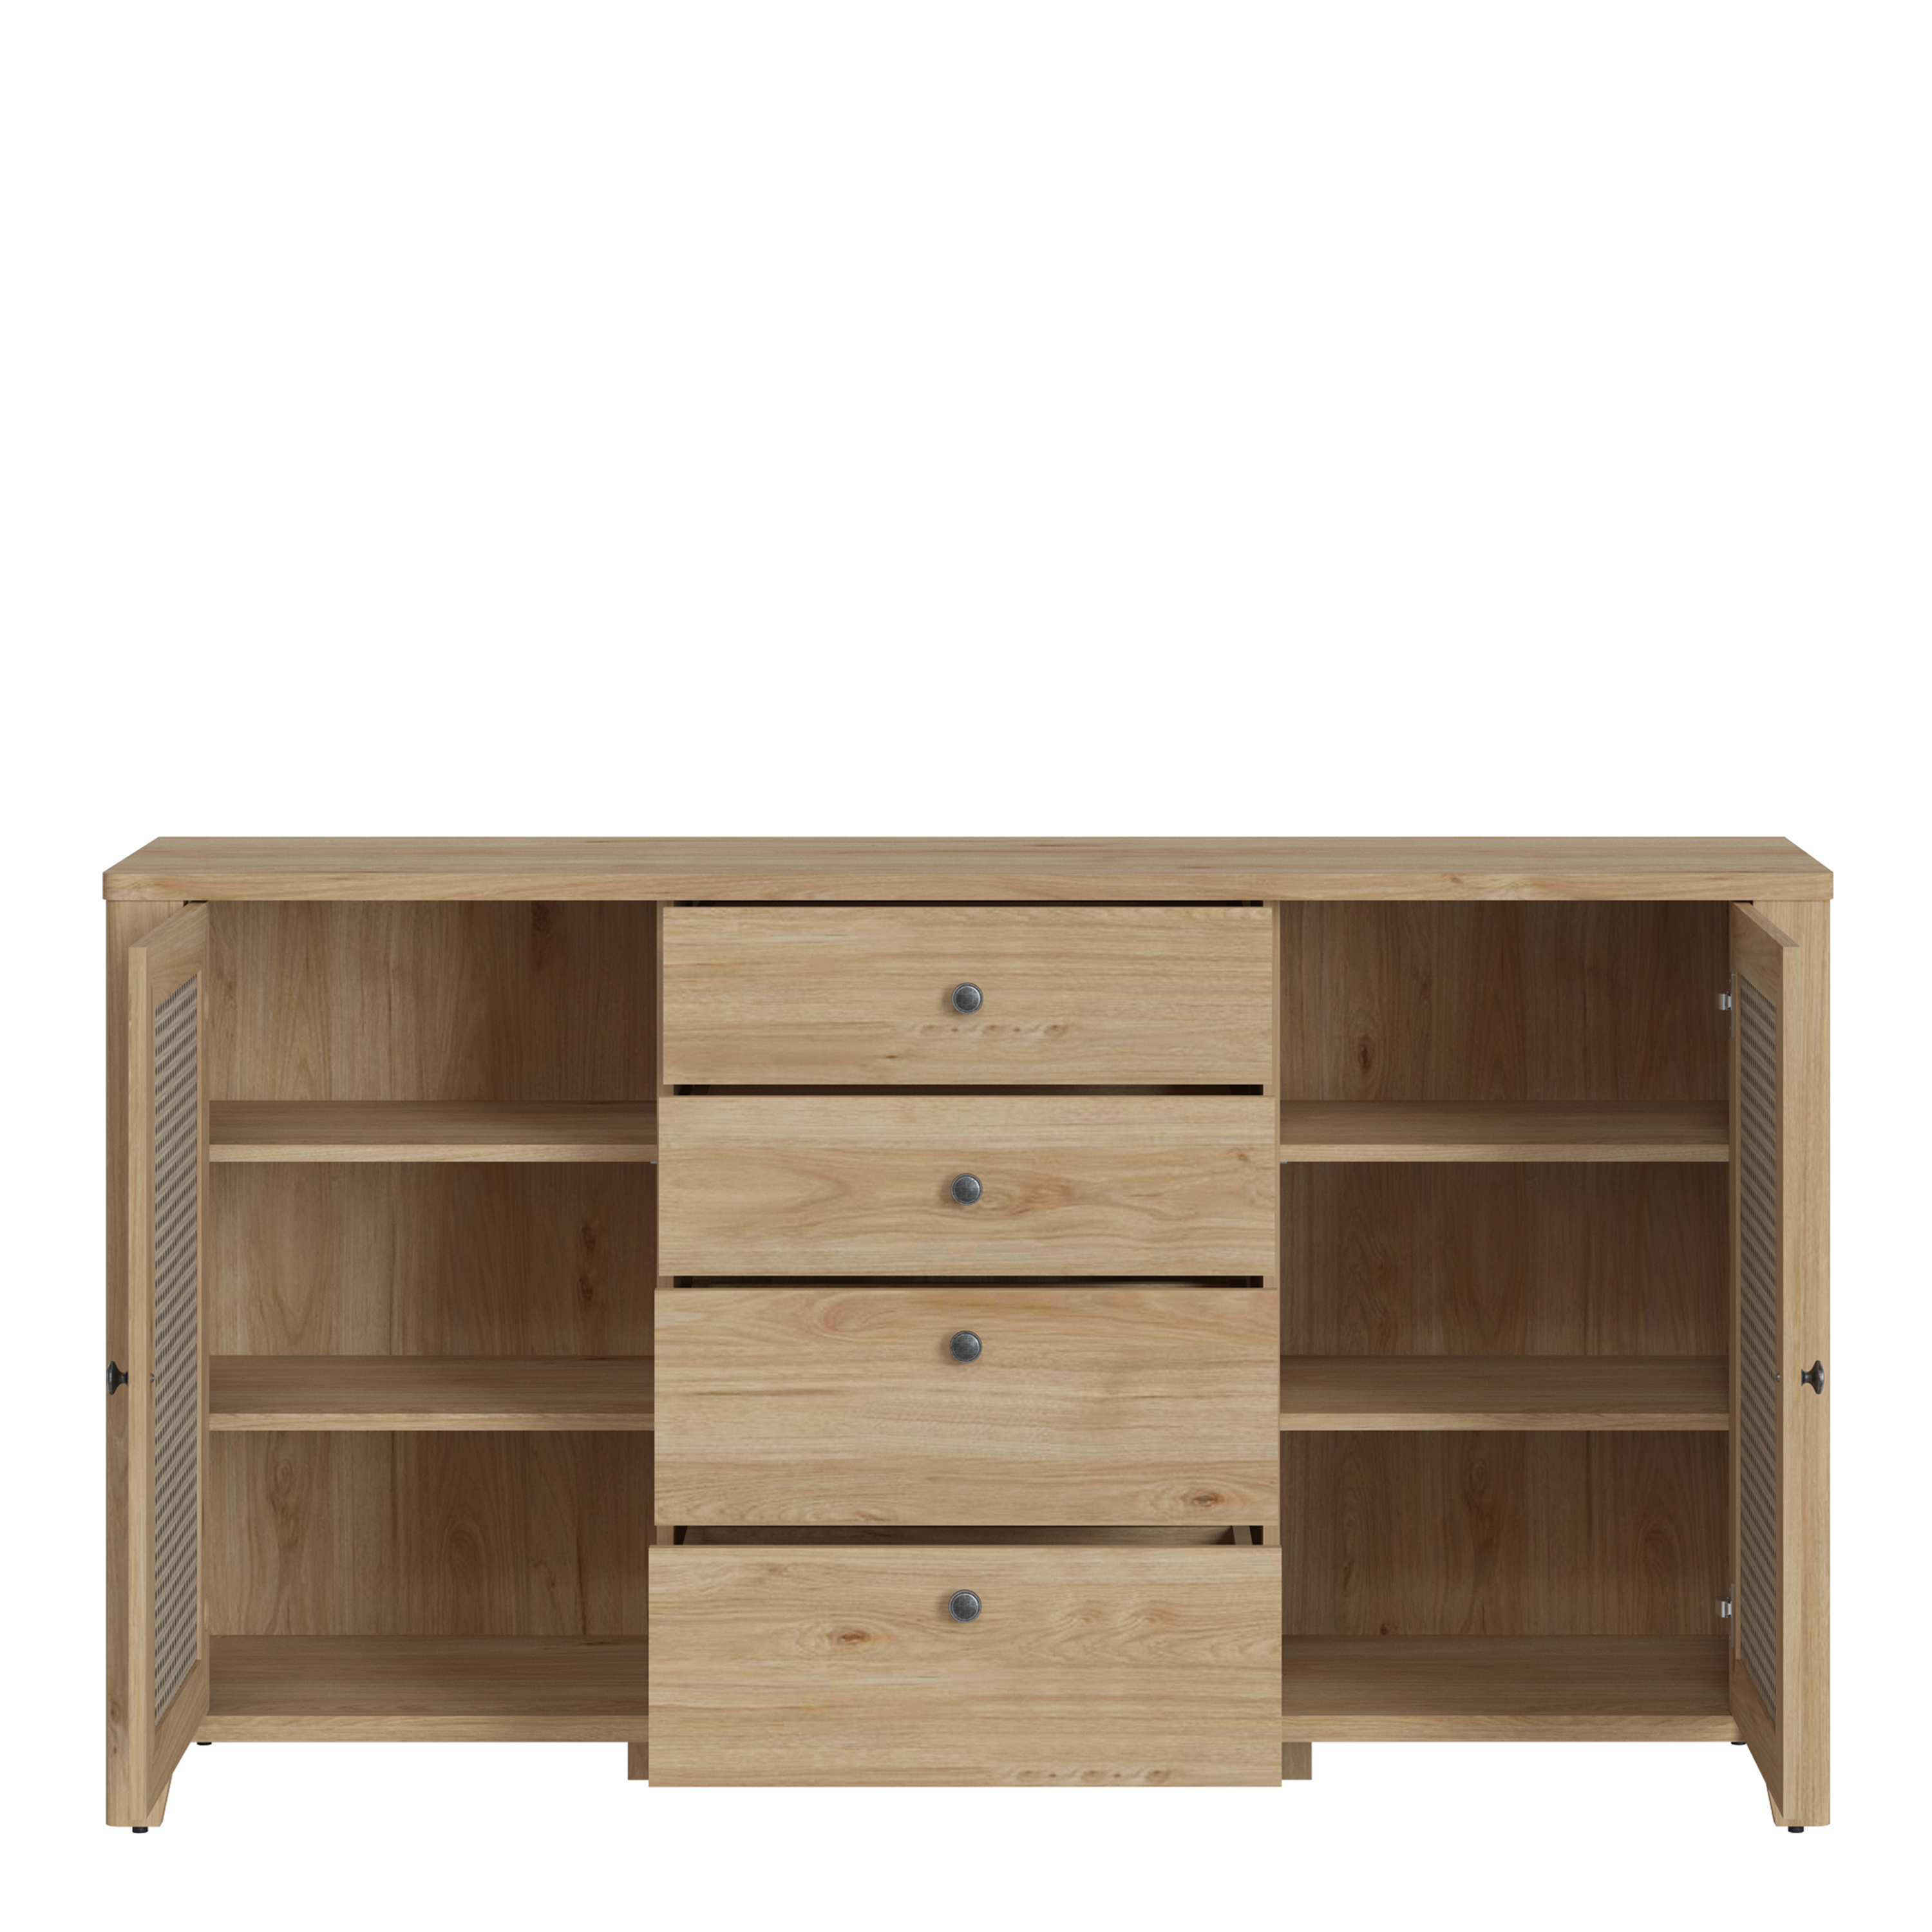 Florence Cestino 2 Door 4 Drawer Oak and Rattan Effect Sideboard Image 2